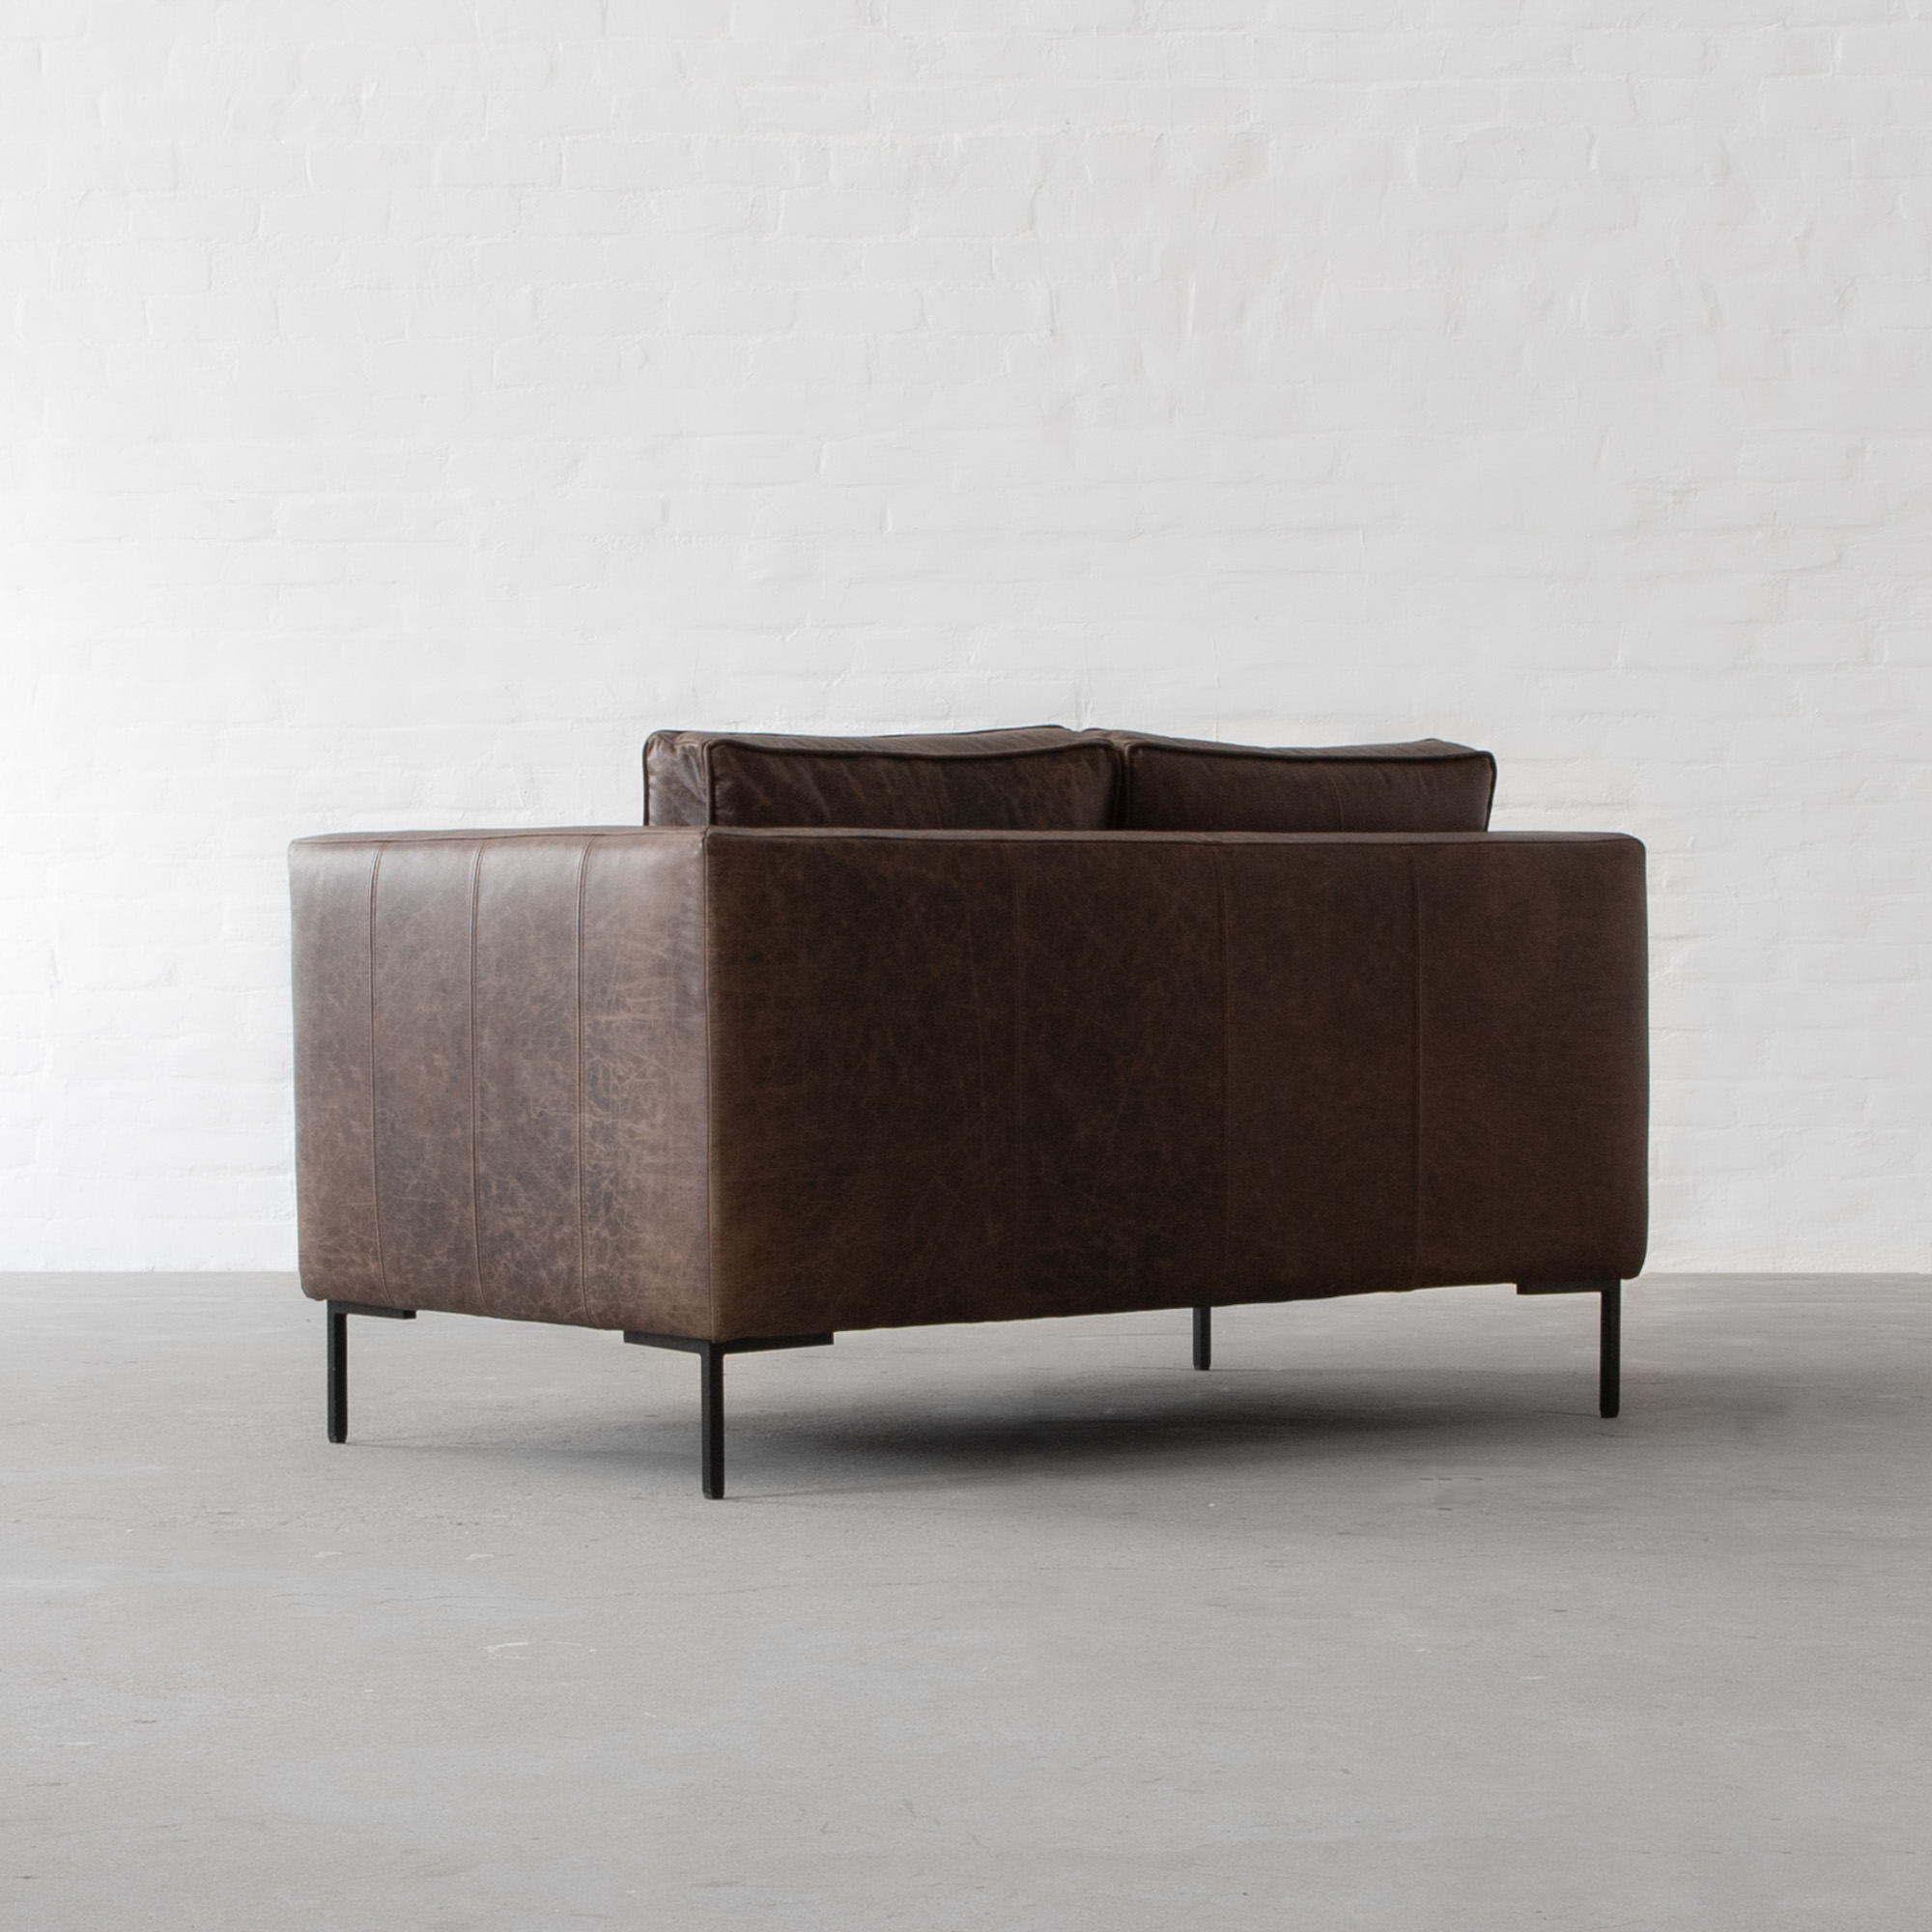 L.A Leather Sofa Collection